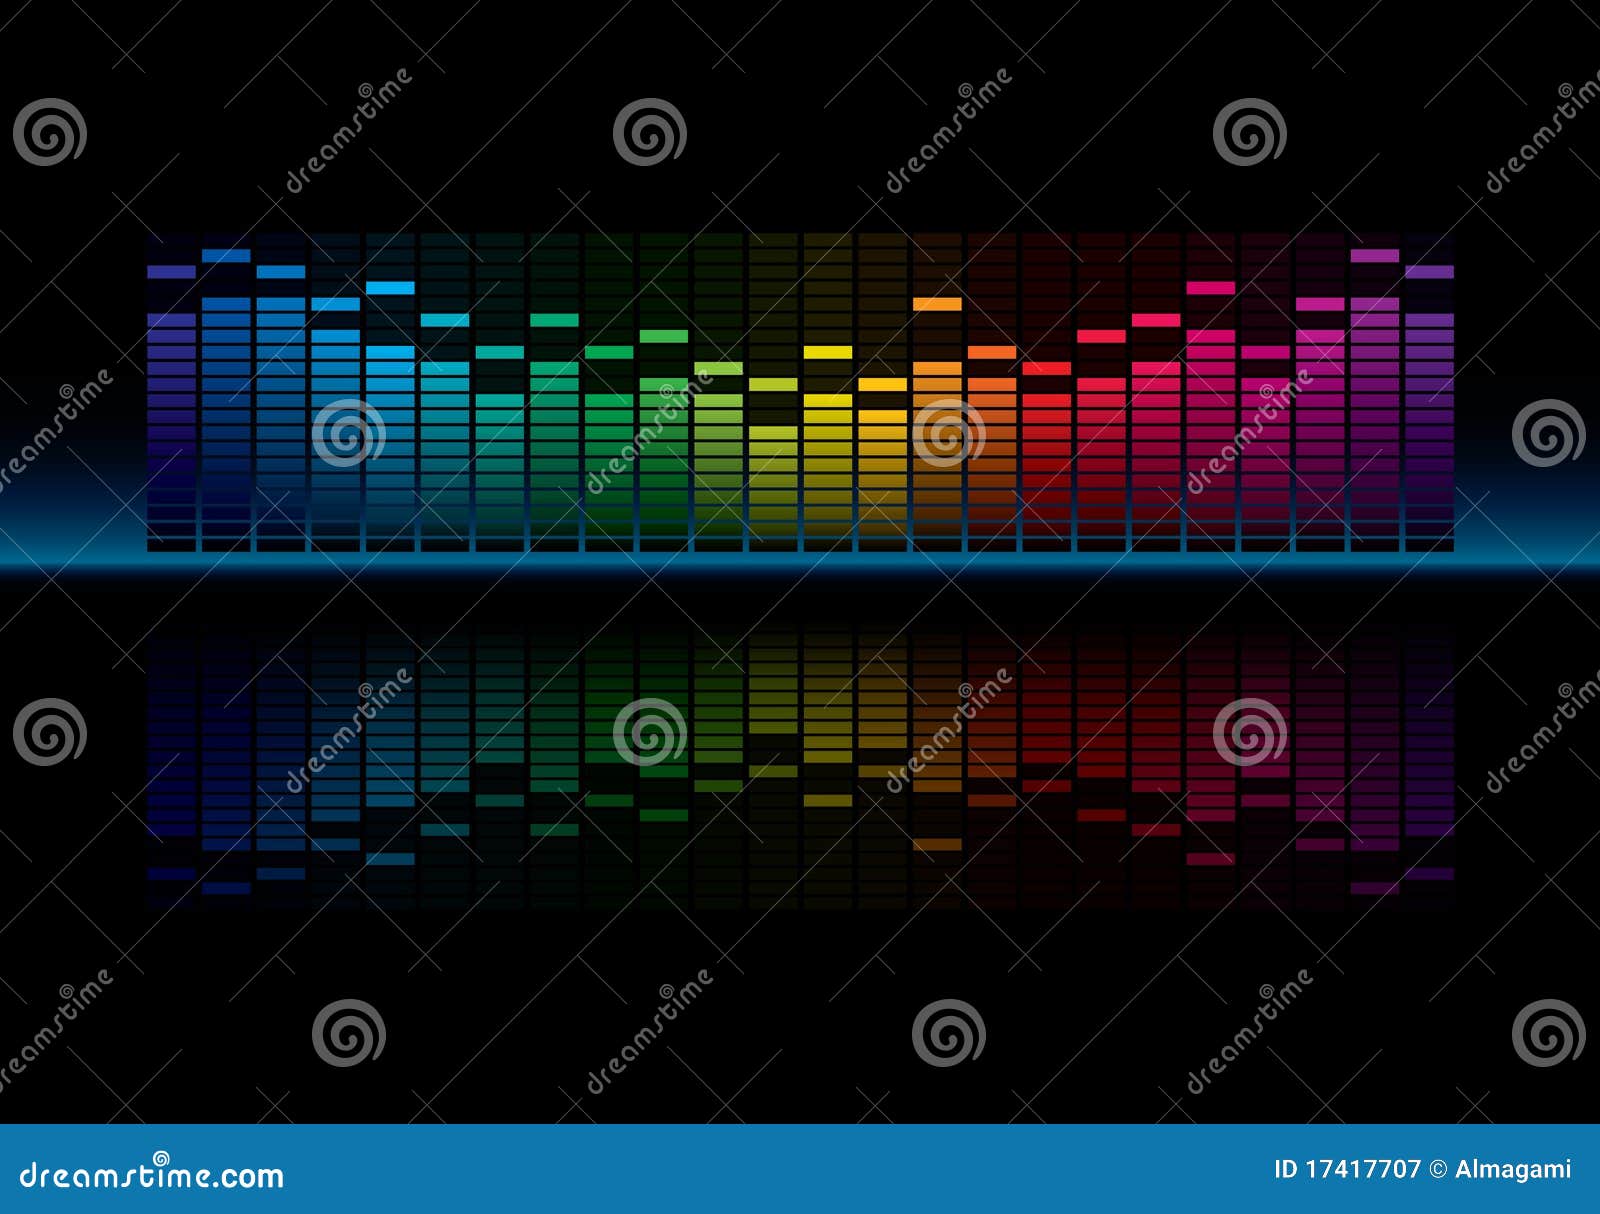 Graphic Equalizer stock vector. Illustration of cover - 17417707